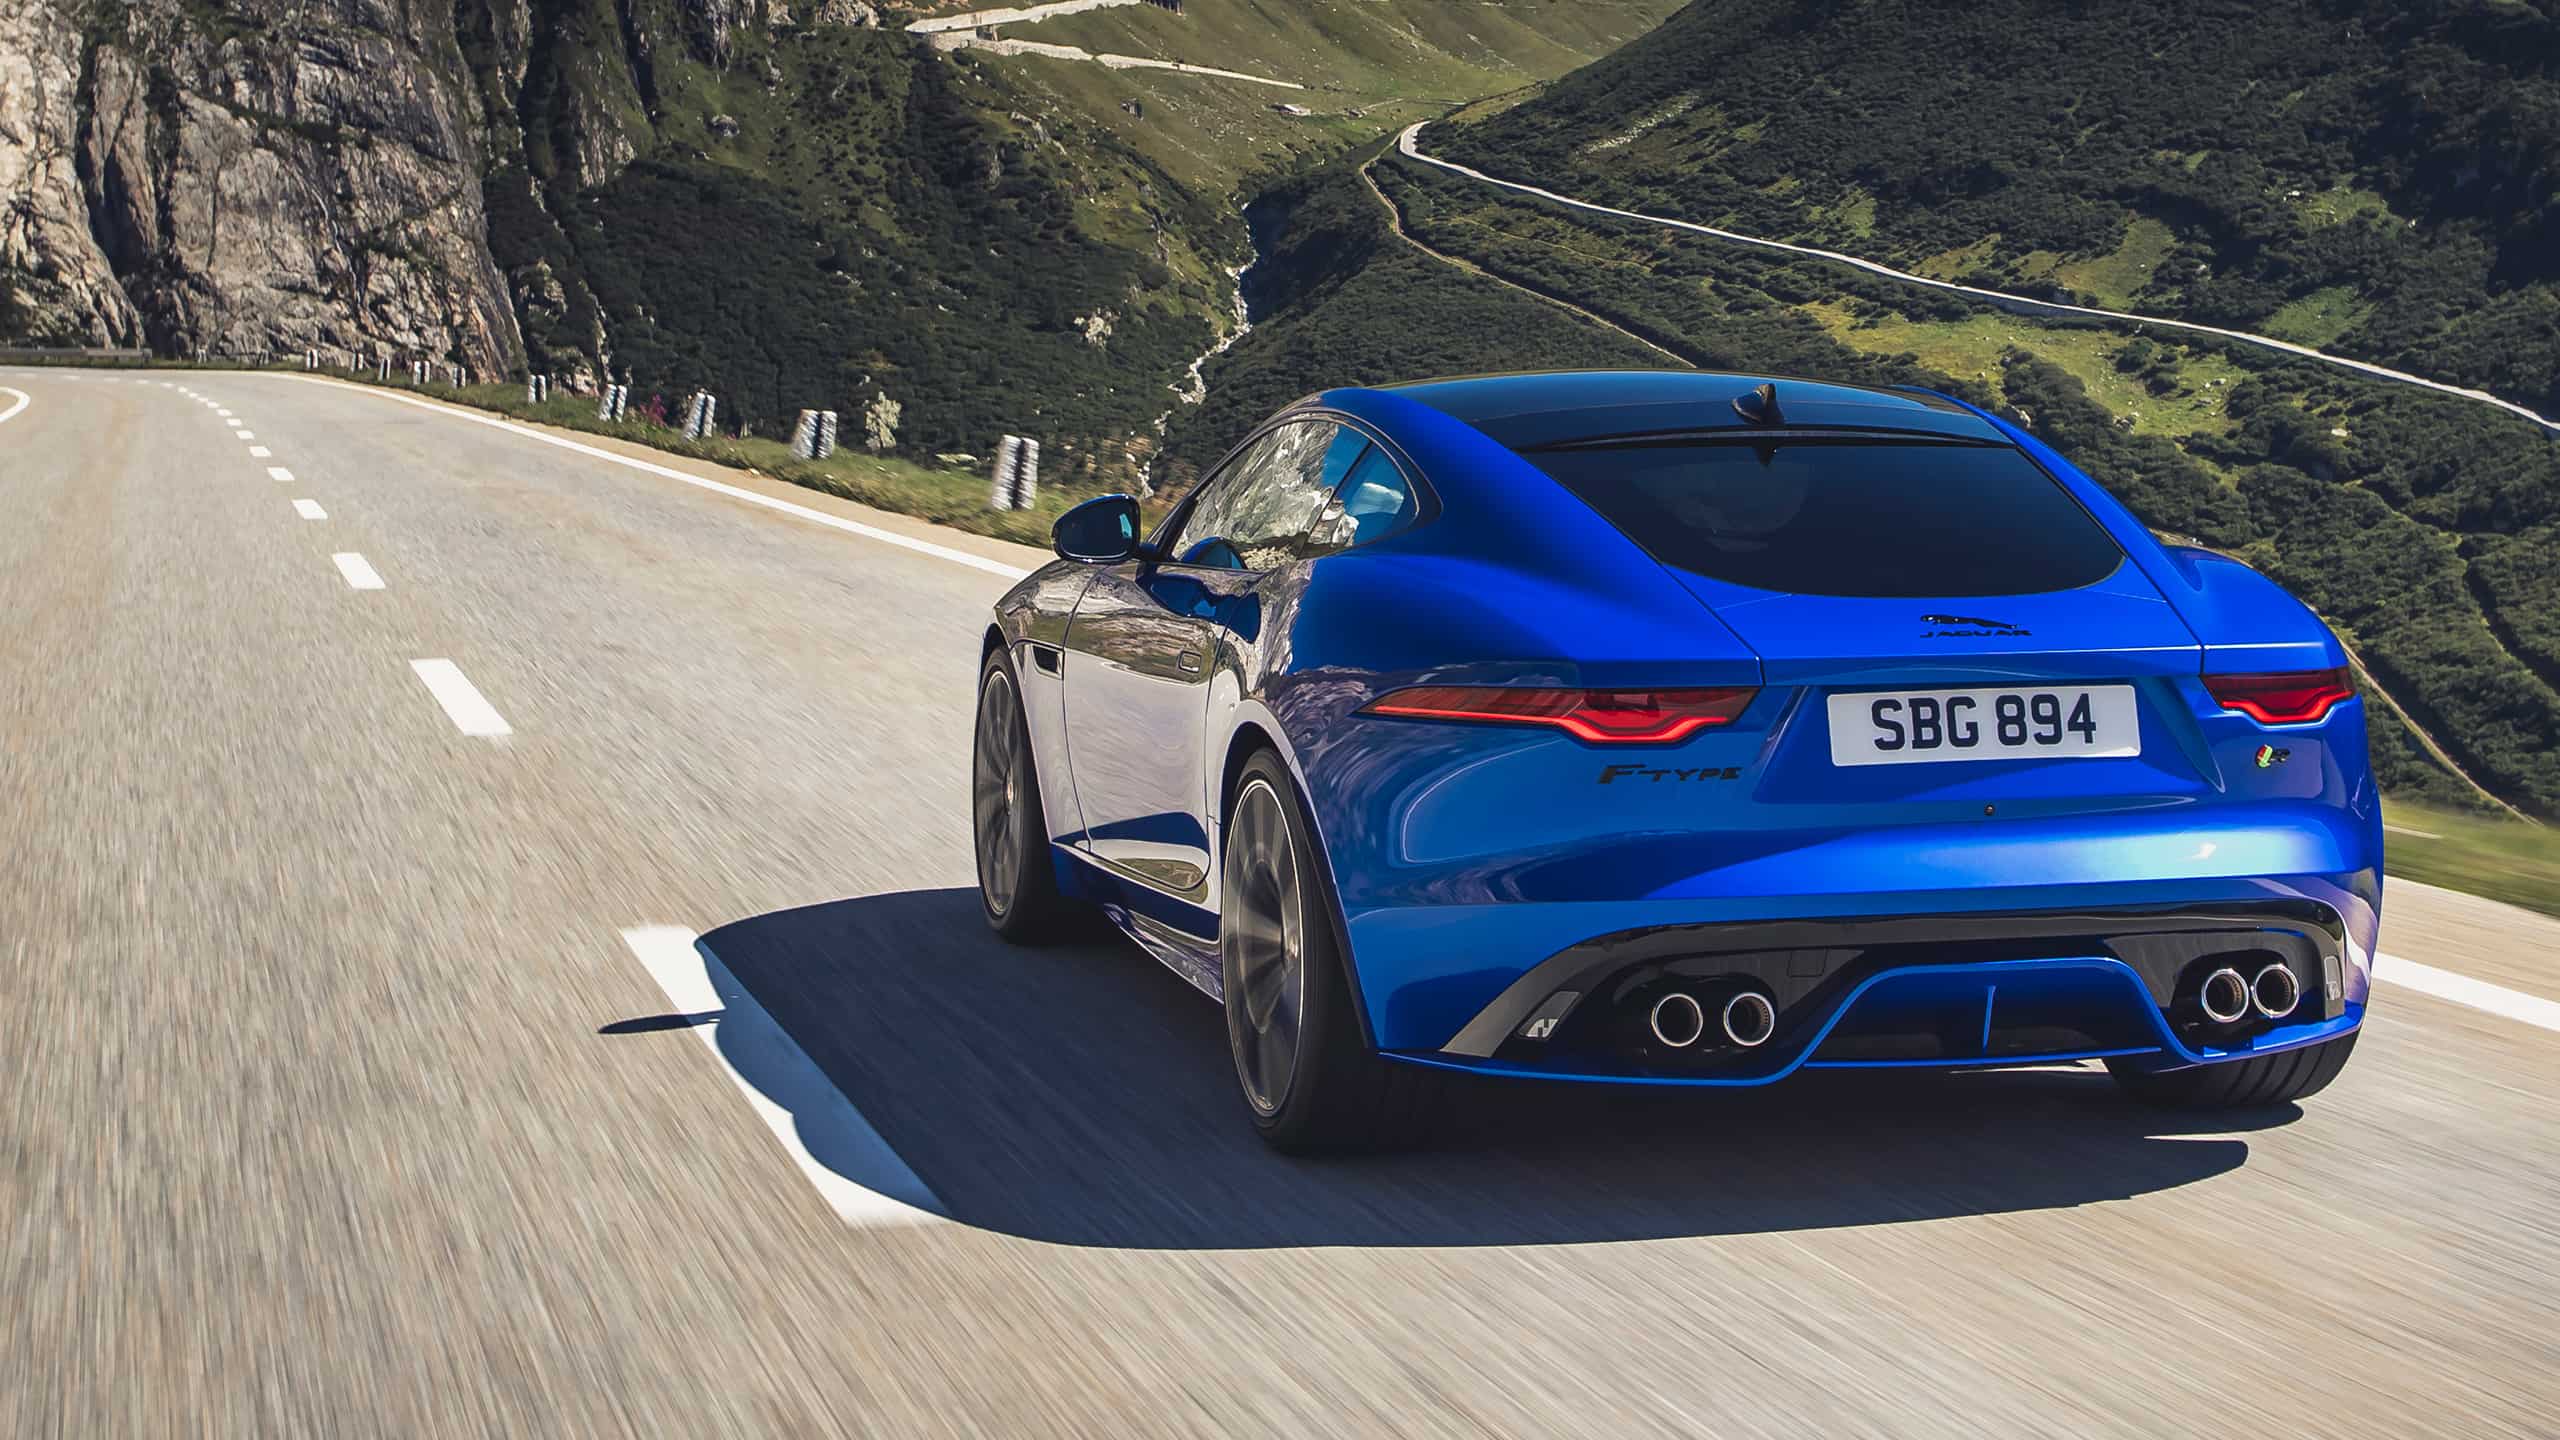 Jaguar F-TYPE moving on a Hilly Road